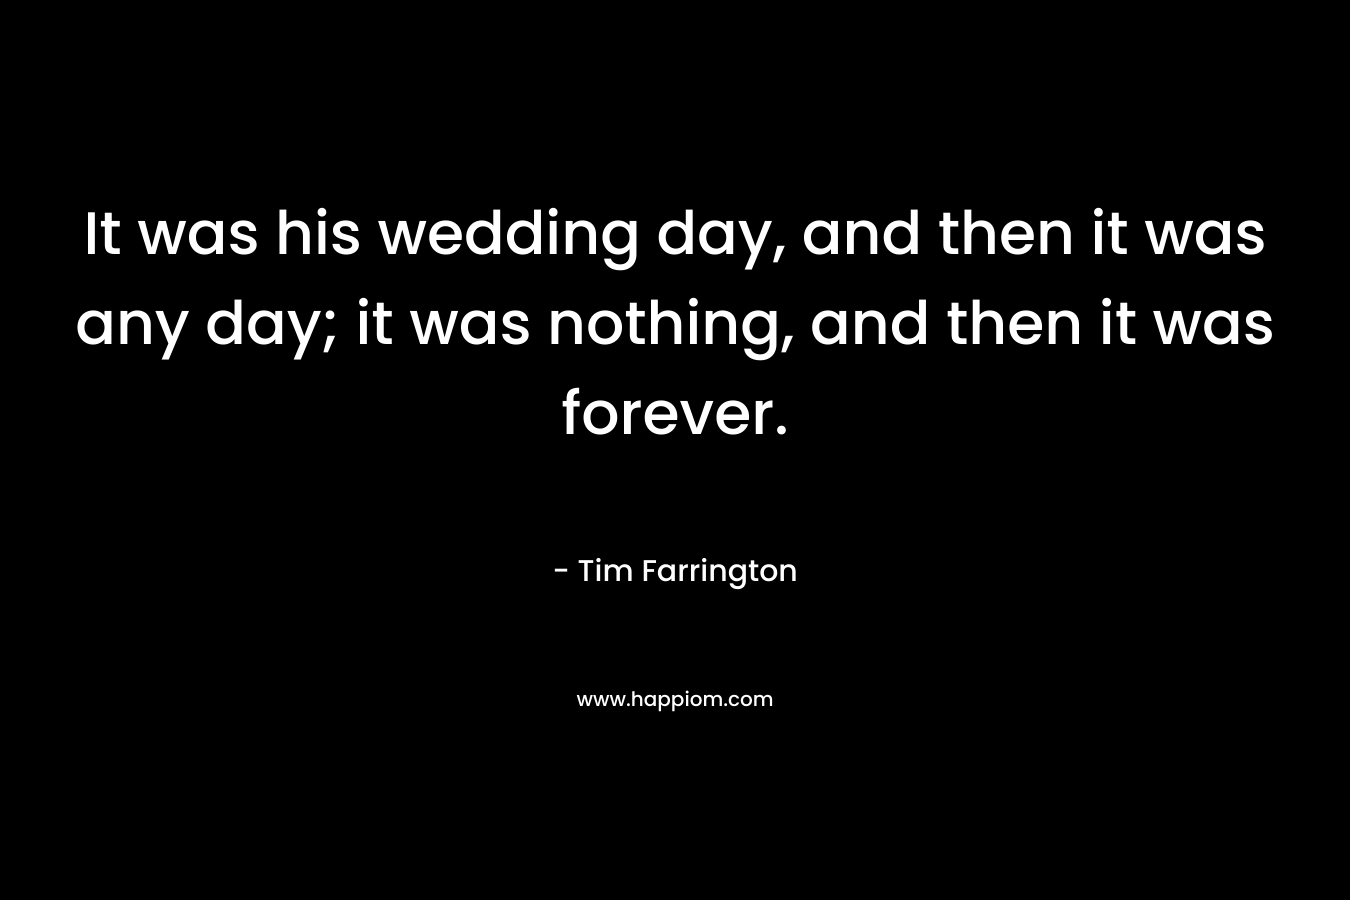 It was his wedding day, and then it was any day; it was nothing, and then it was forever. – Tim Farrington